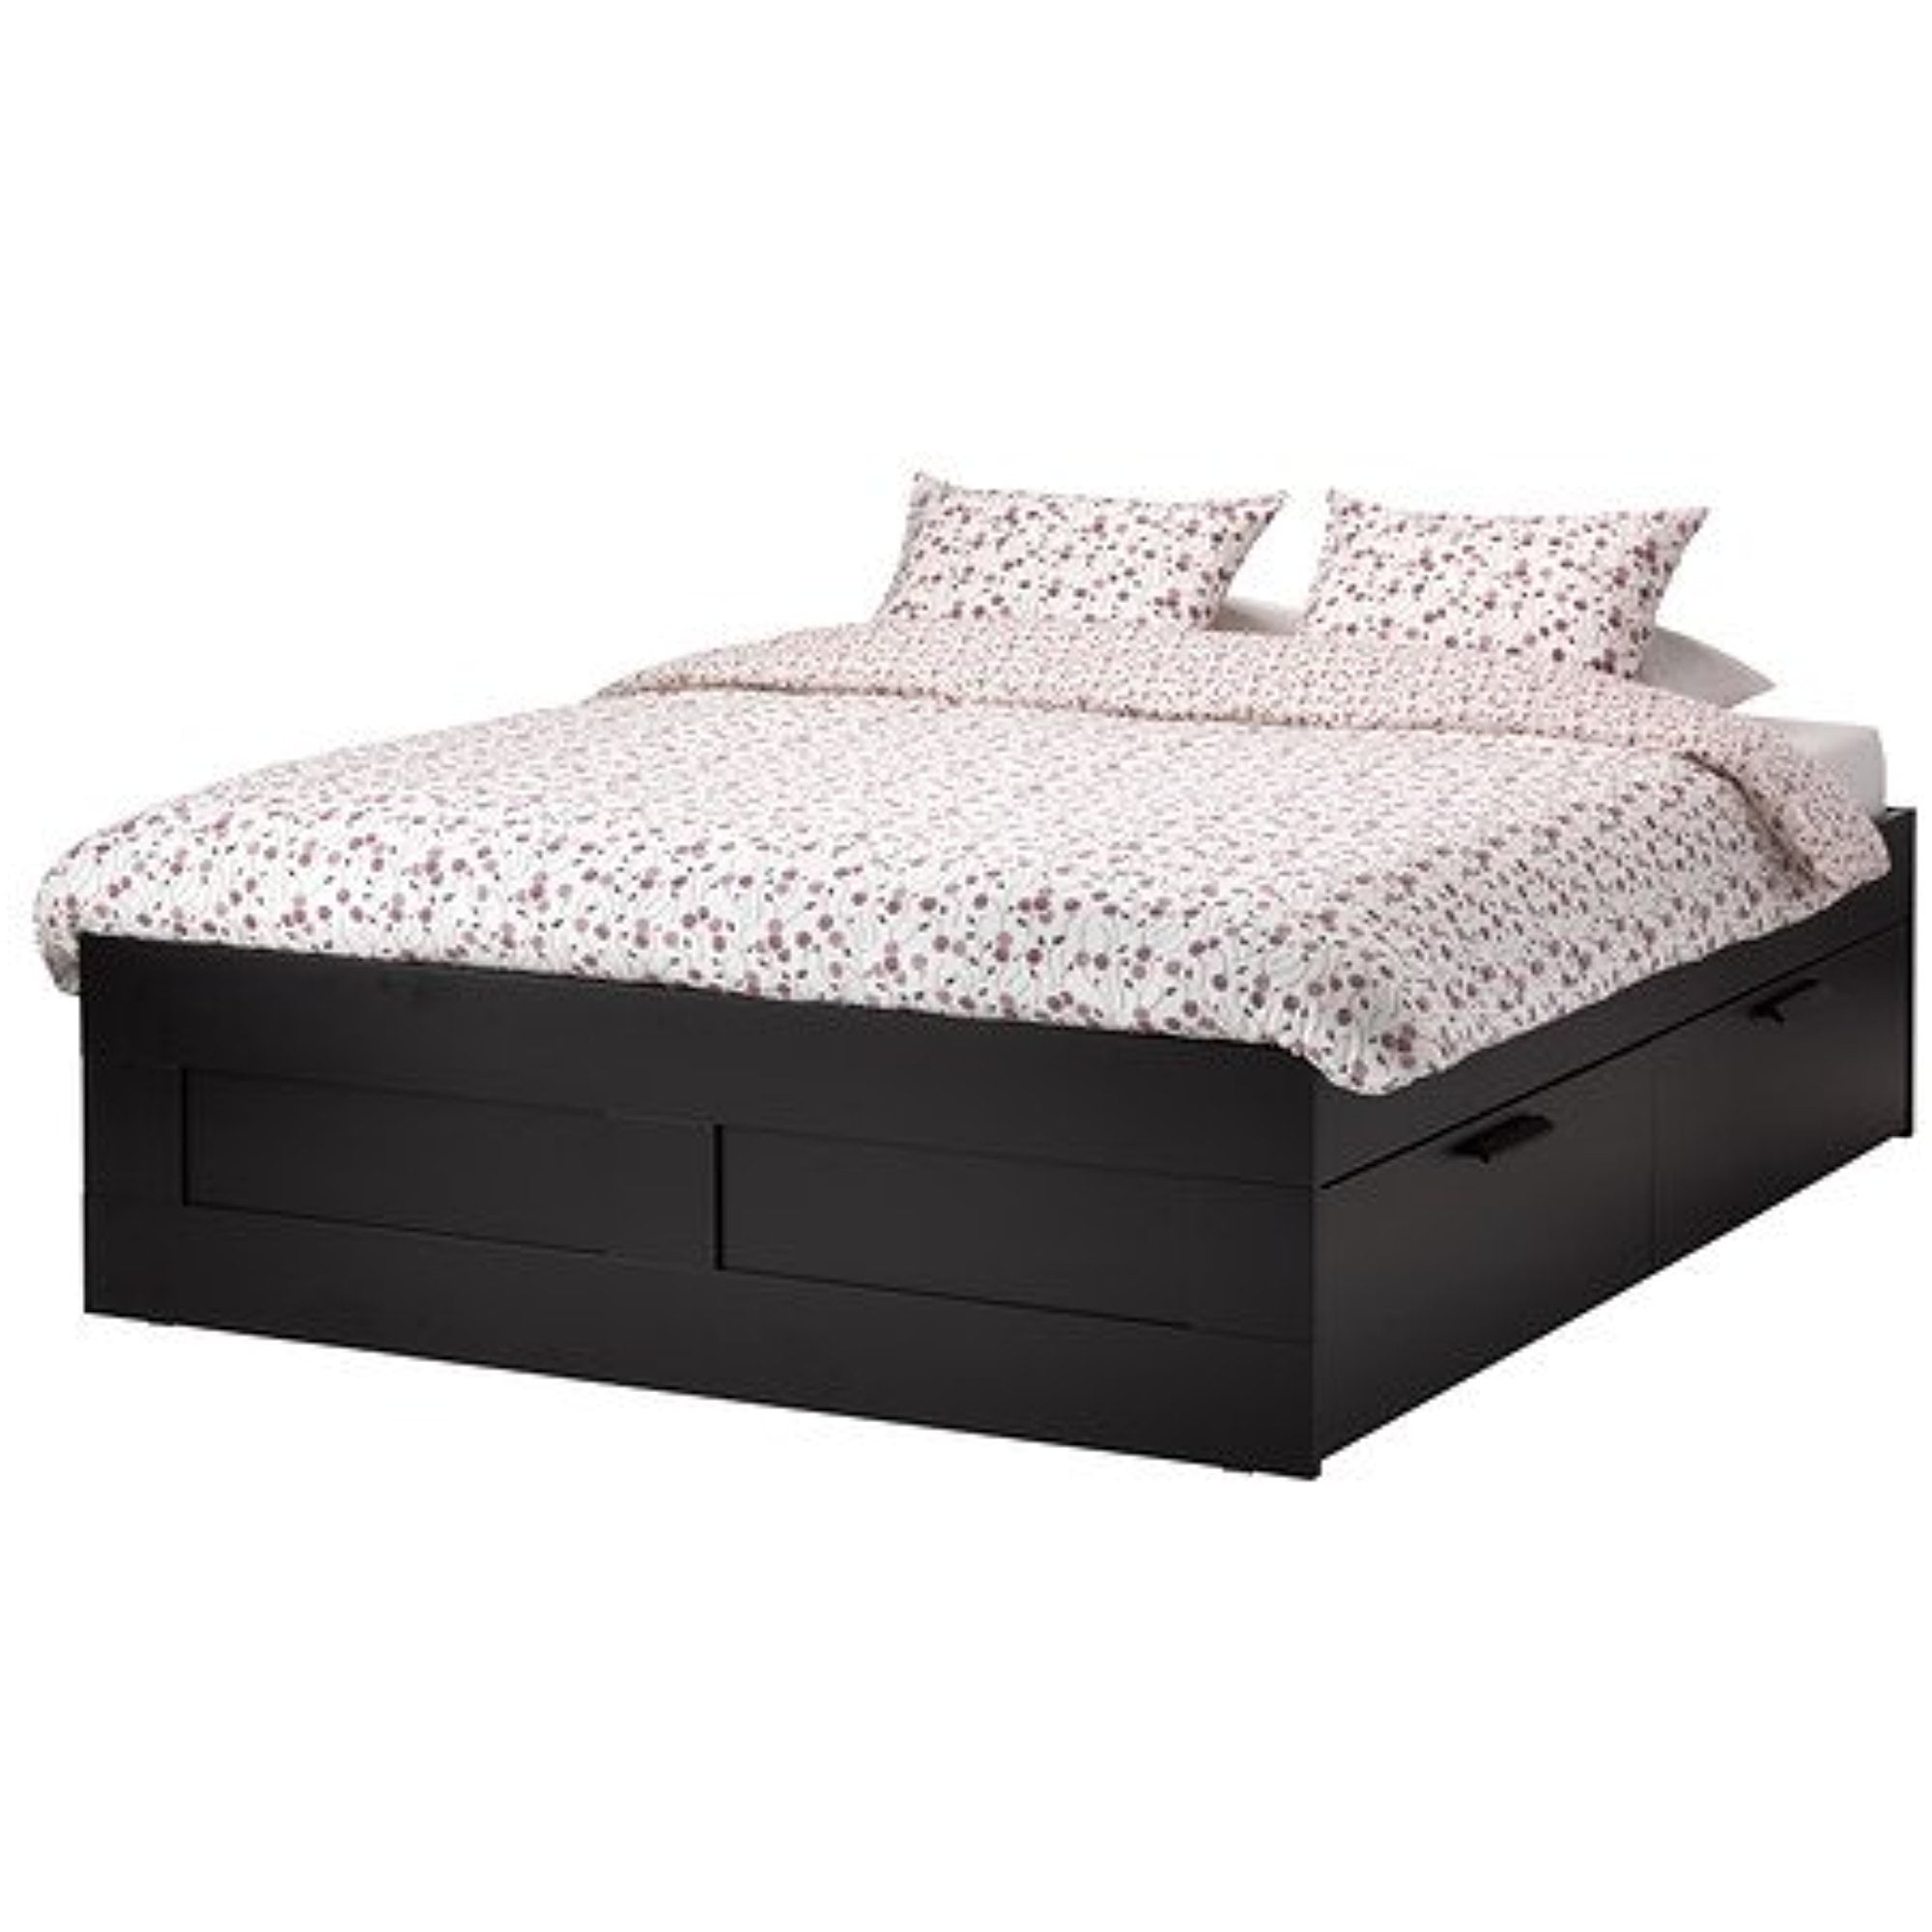 Ikea Queen Size Bed Frame With Storage, Do You Need A Box Spring With Ikea Bed Frame